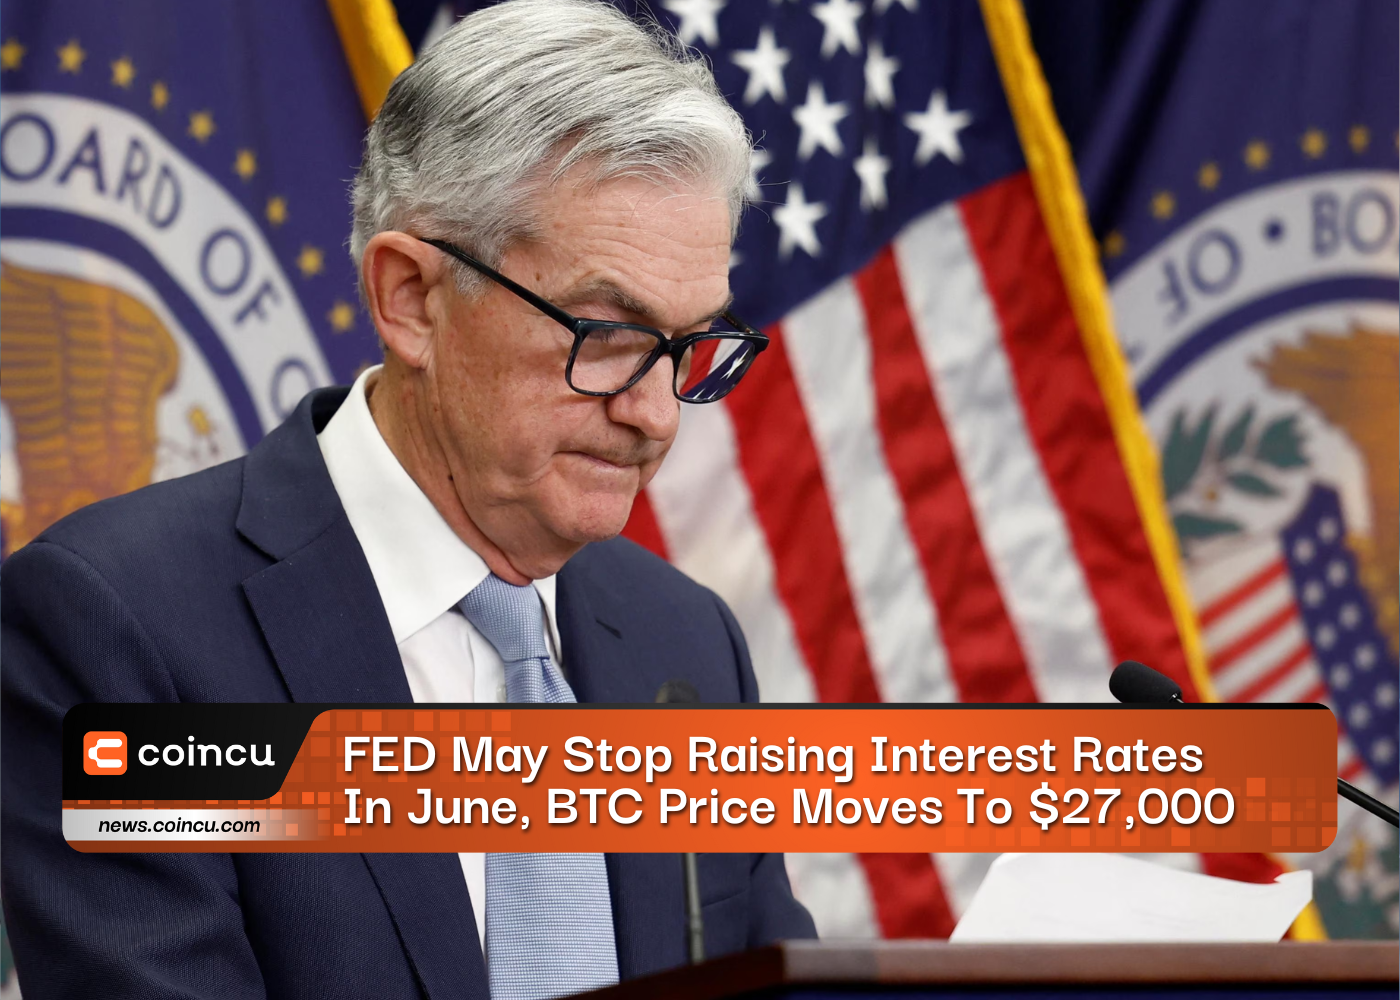 FED May Stop Raising Interest Rates In June, BTC Price Moves To $27,000